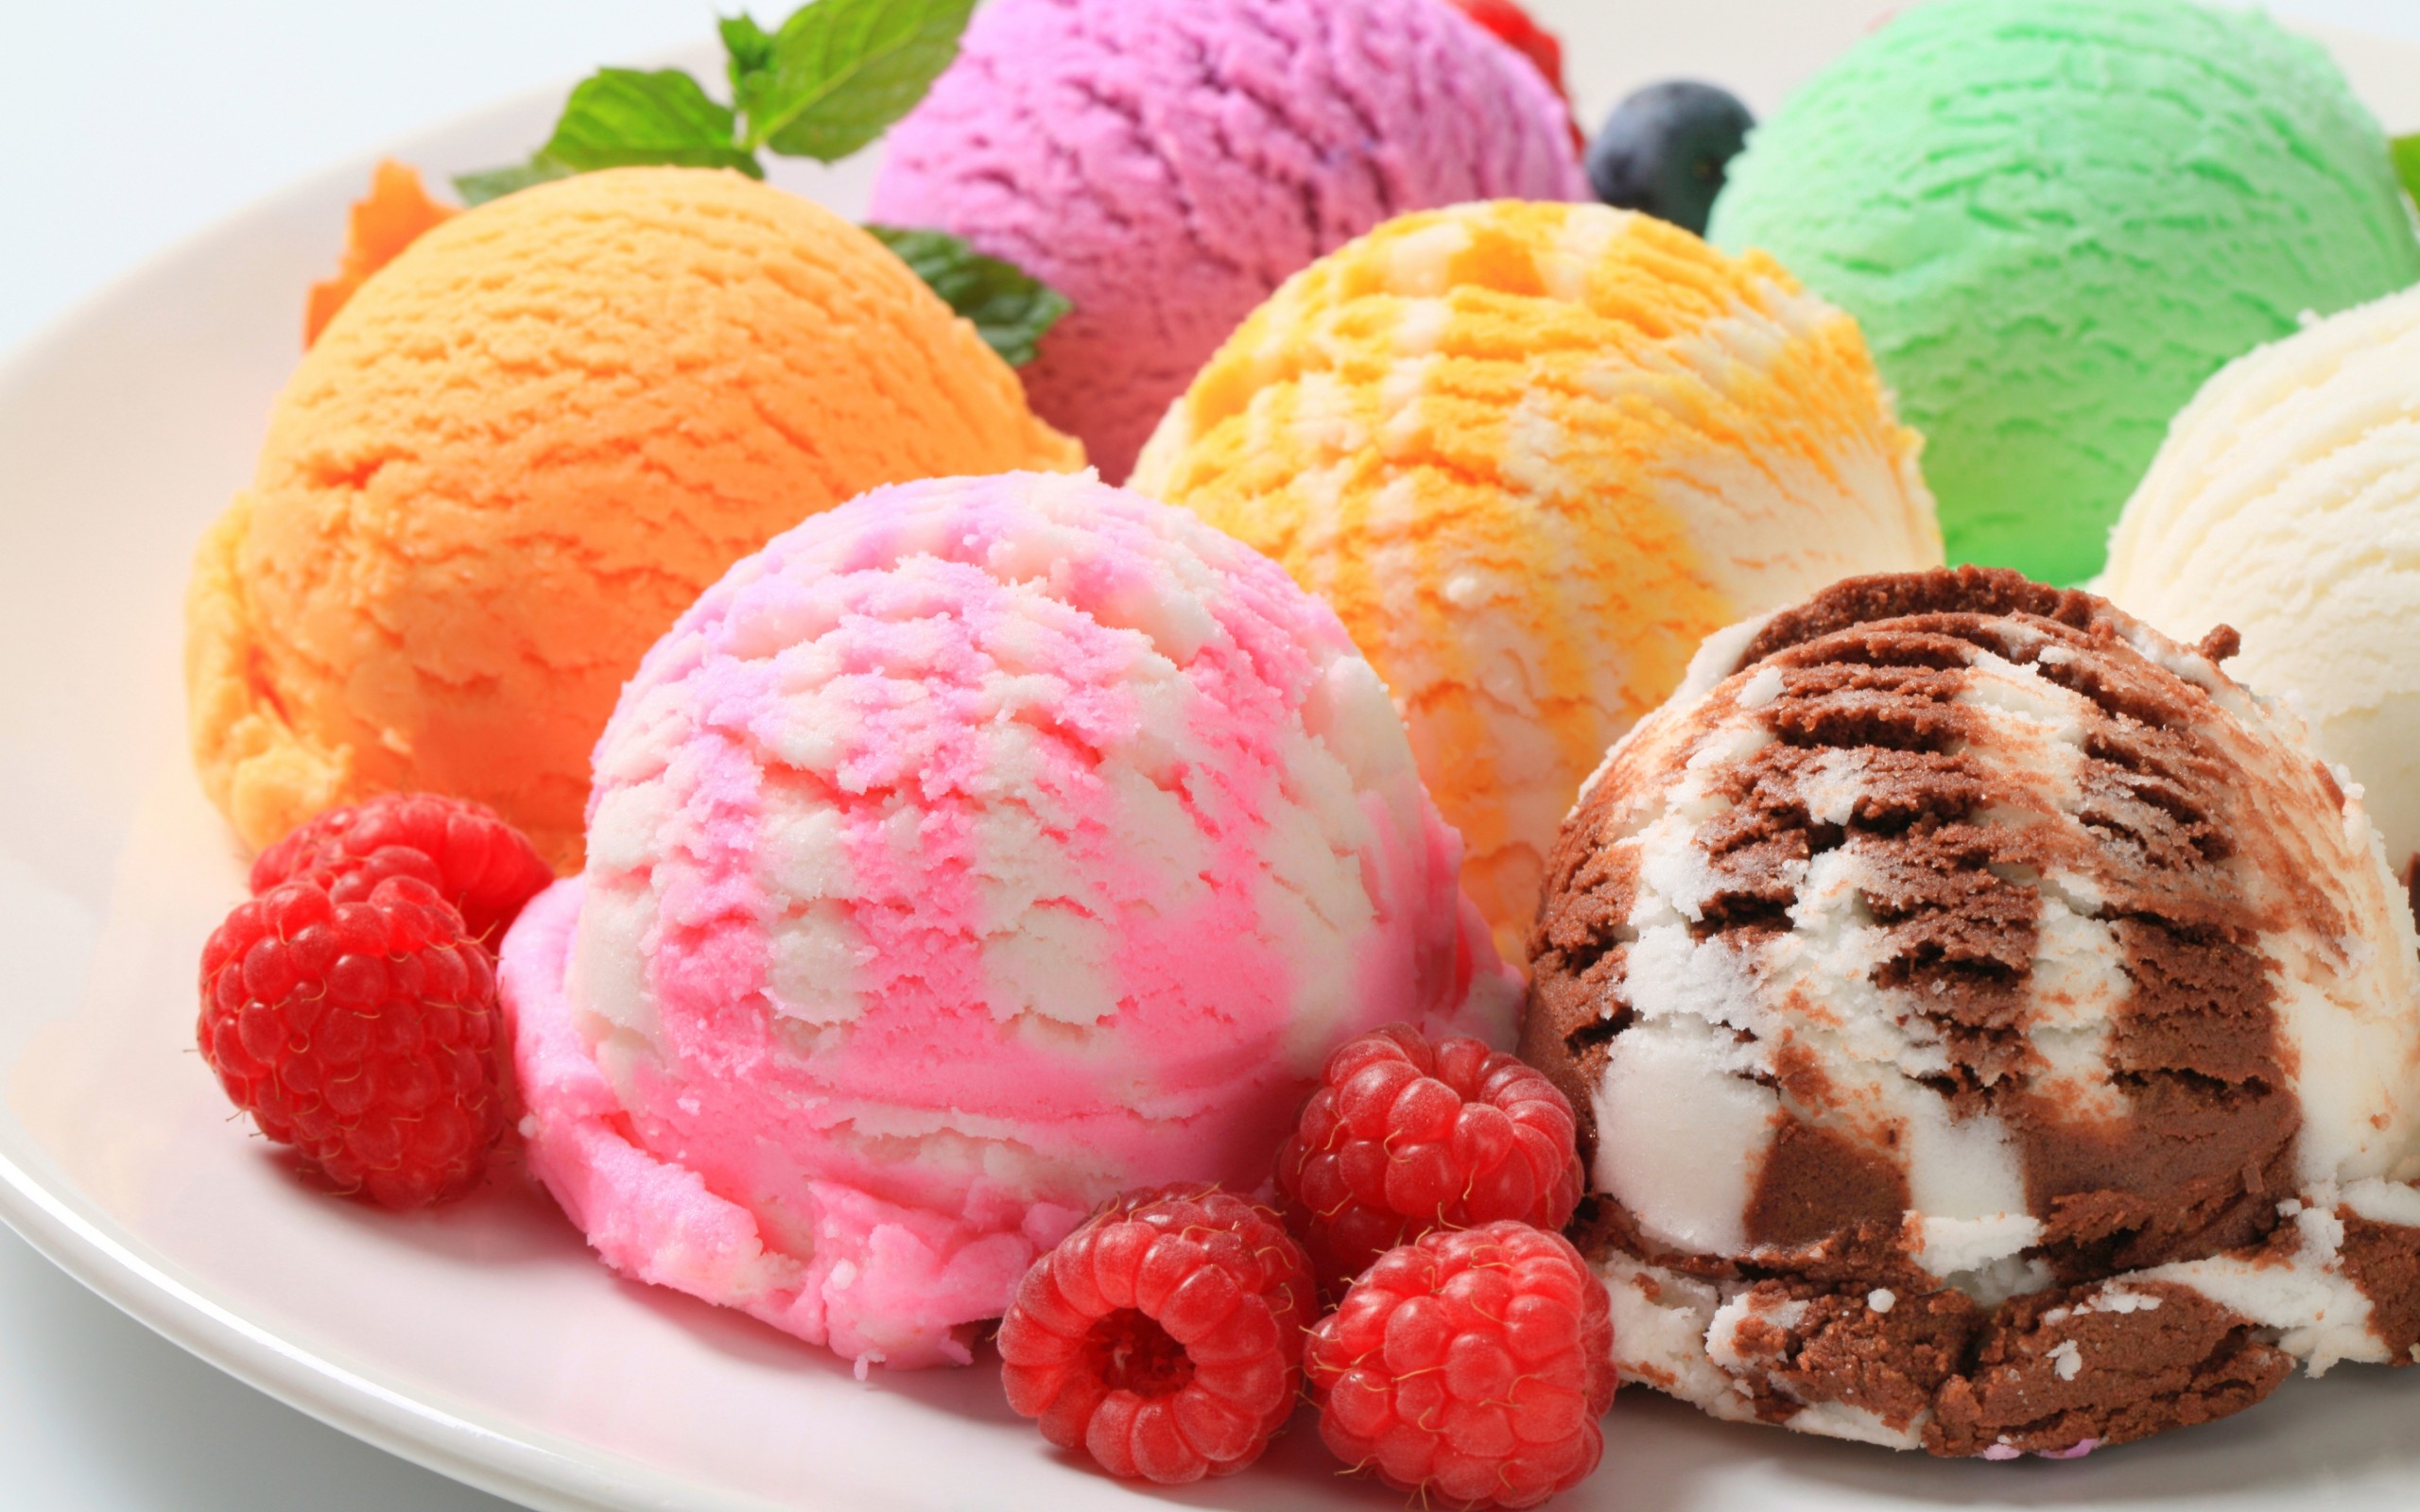 Awesome Ice Cream Wallpaper